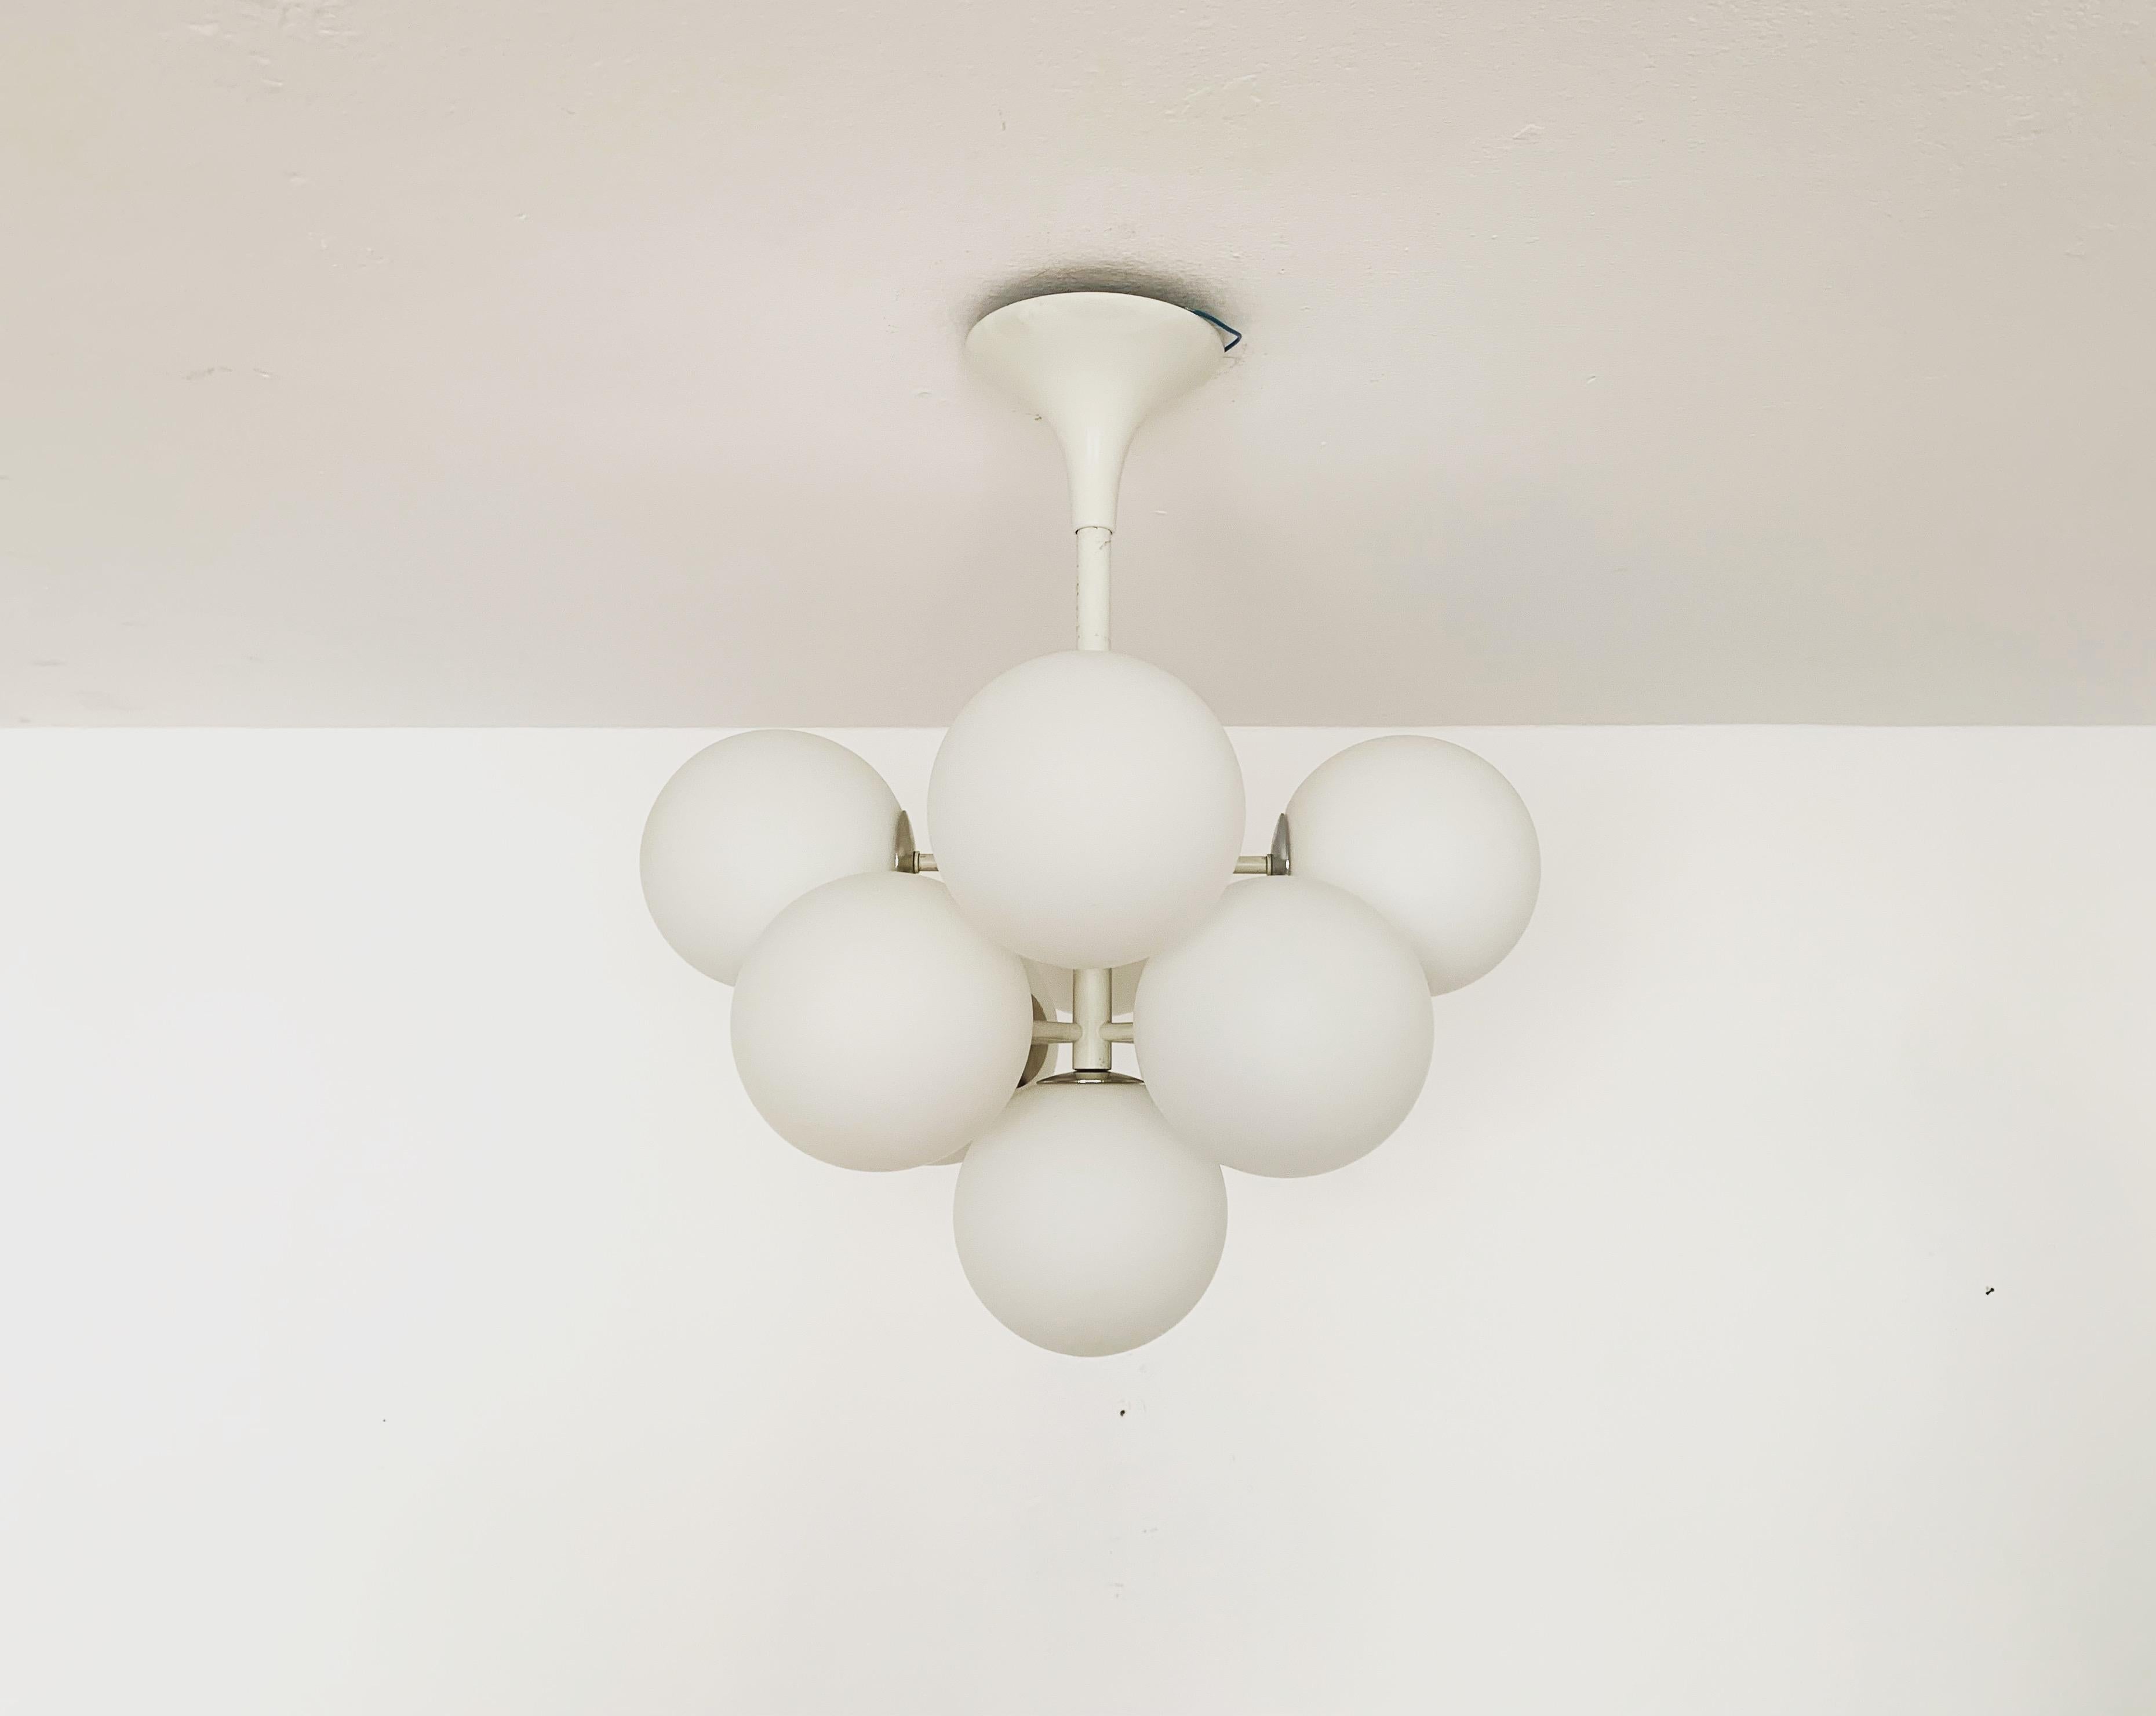 Extremely beautiful Sputnik chandelier from the 1960s.
The 9 opal glass lampshades spread a pleasant light.
The lamp has a very high quality finish.
Very contemporary design with a fantastic look.

Manufacturer: Temde.
Design: Max